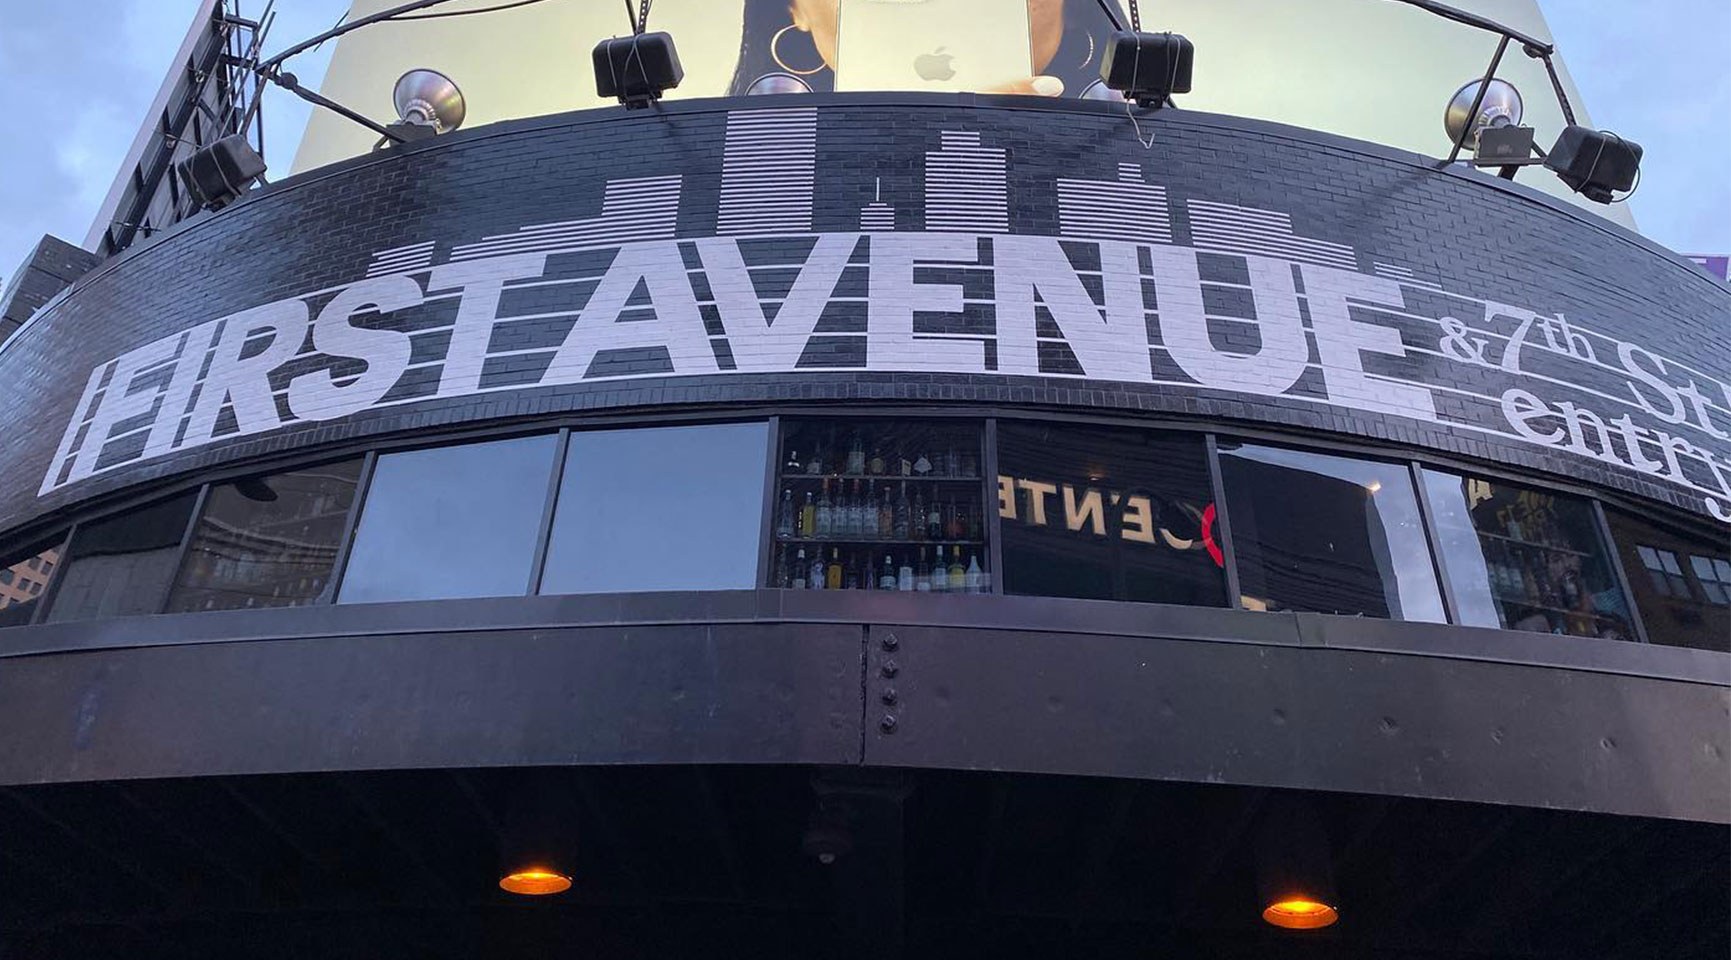 outside sign of first avenue